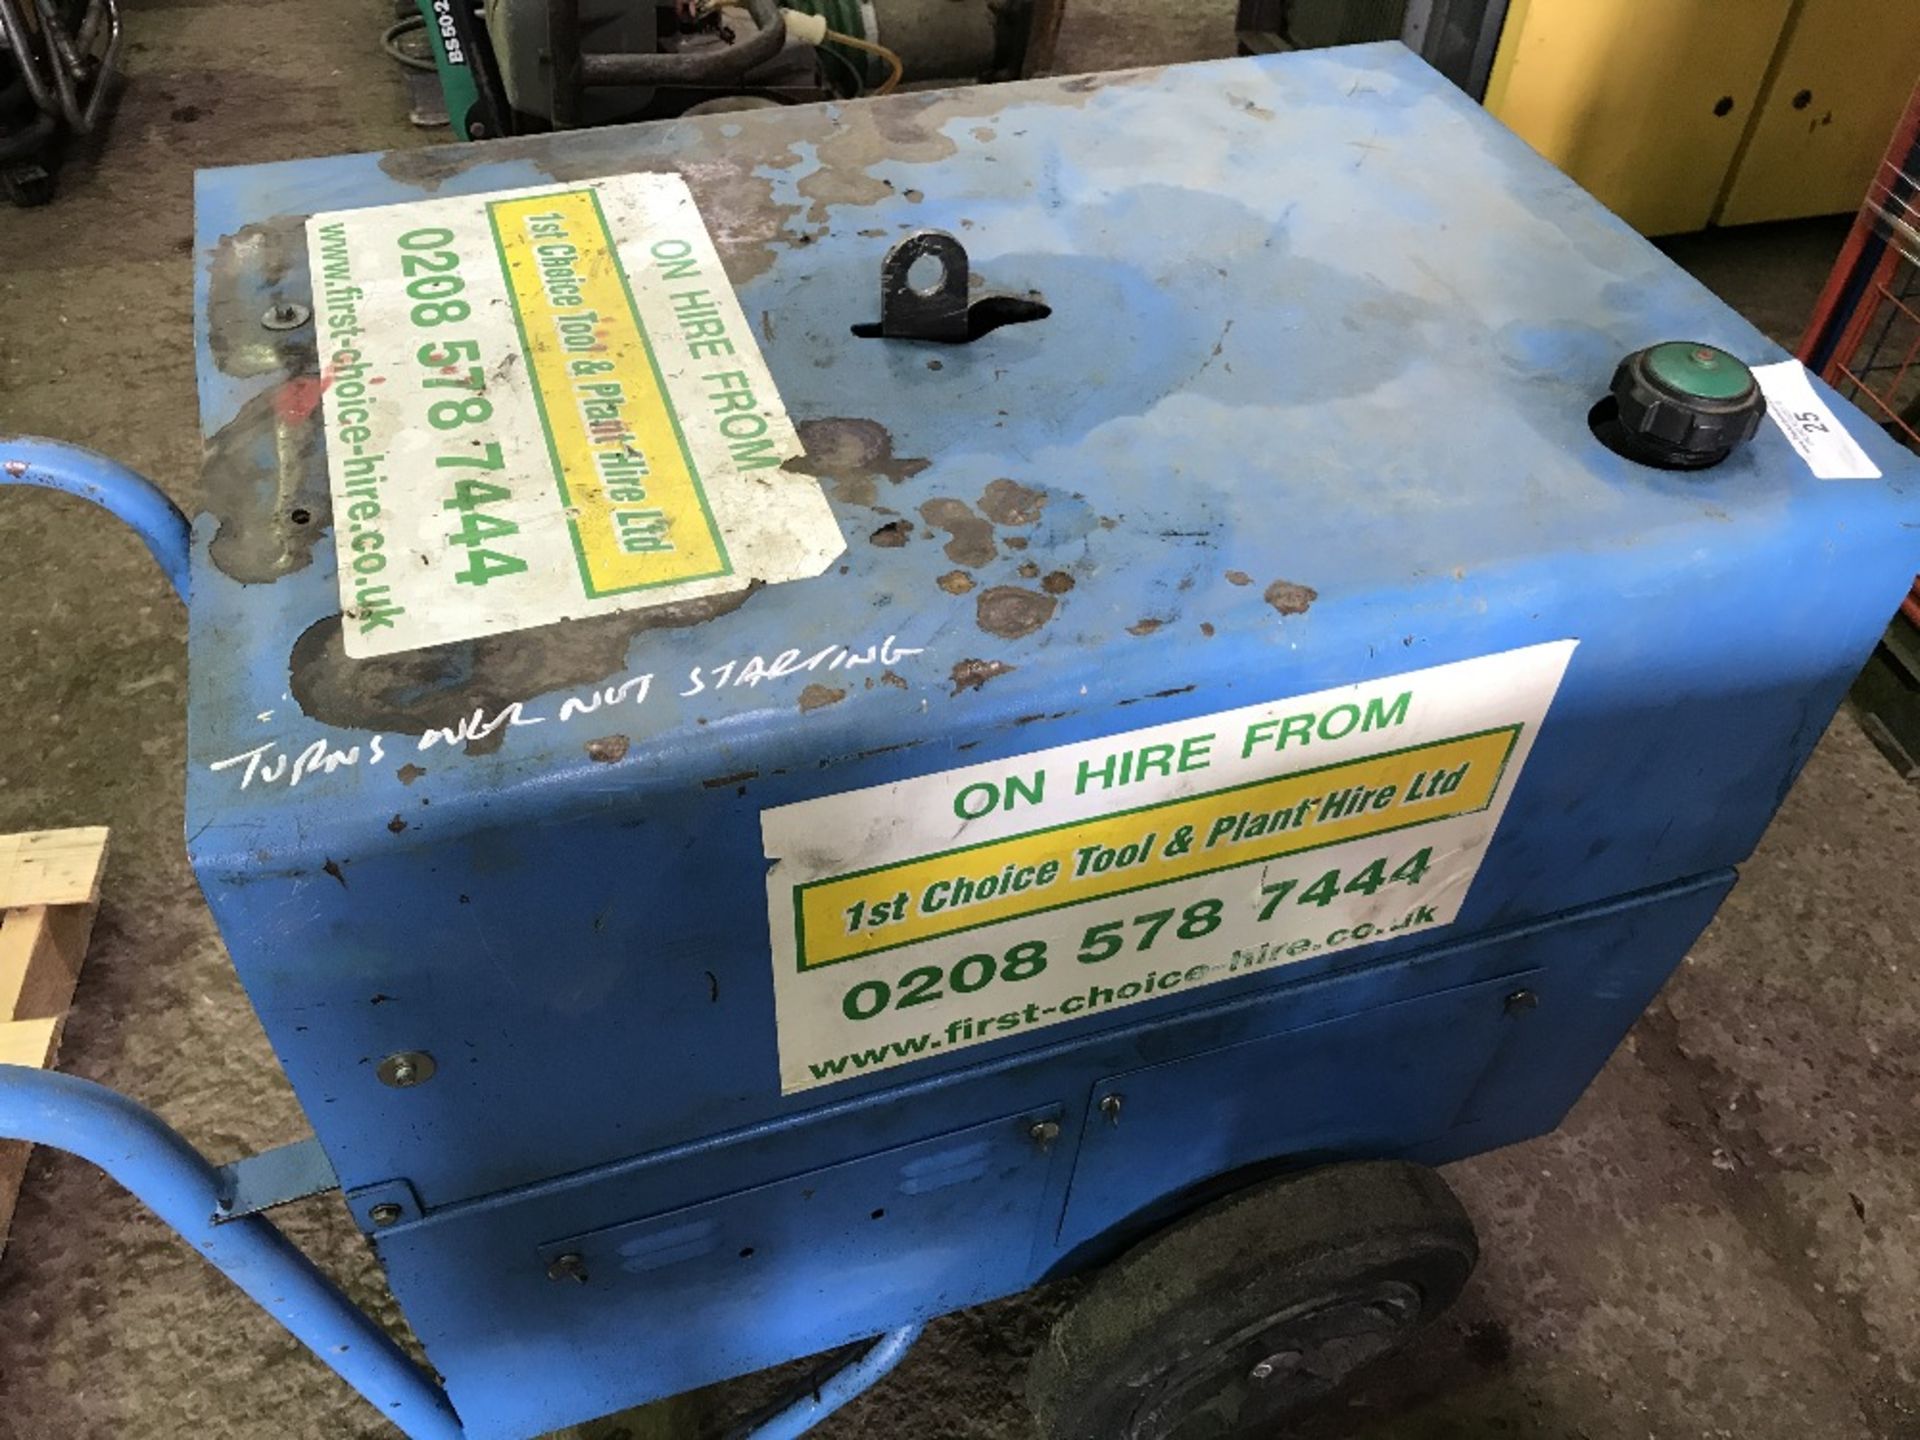 STEPHILL SSD6000 BARROW GENERATOR, 6KVA RATED. WHEN TESTED WAS SEEN TO TURN OVER BUT NOT STARTING